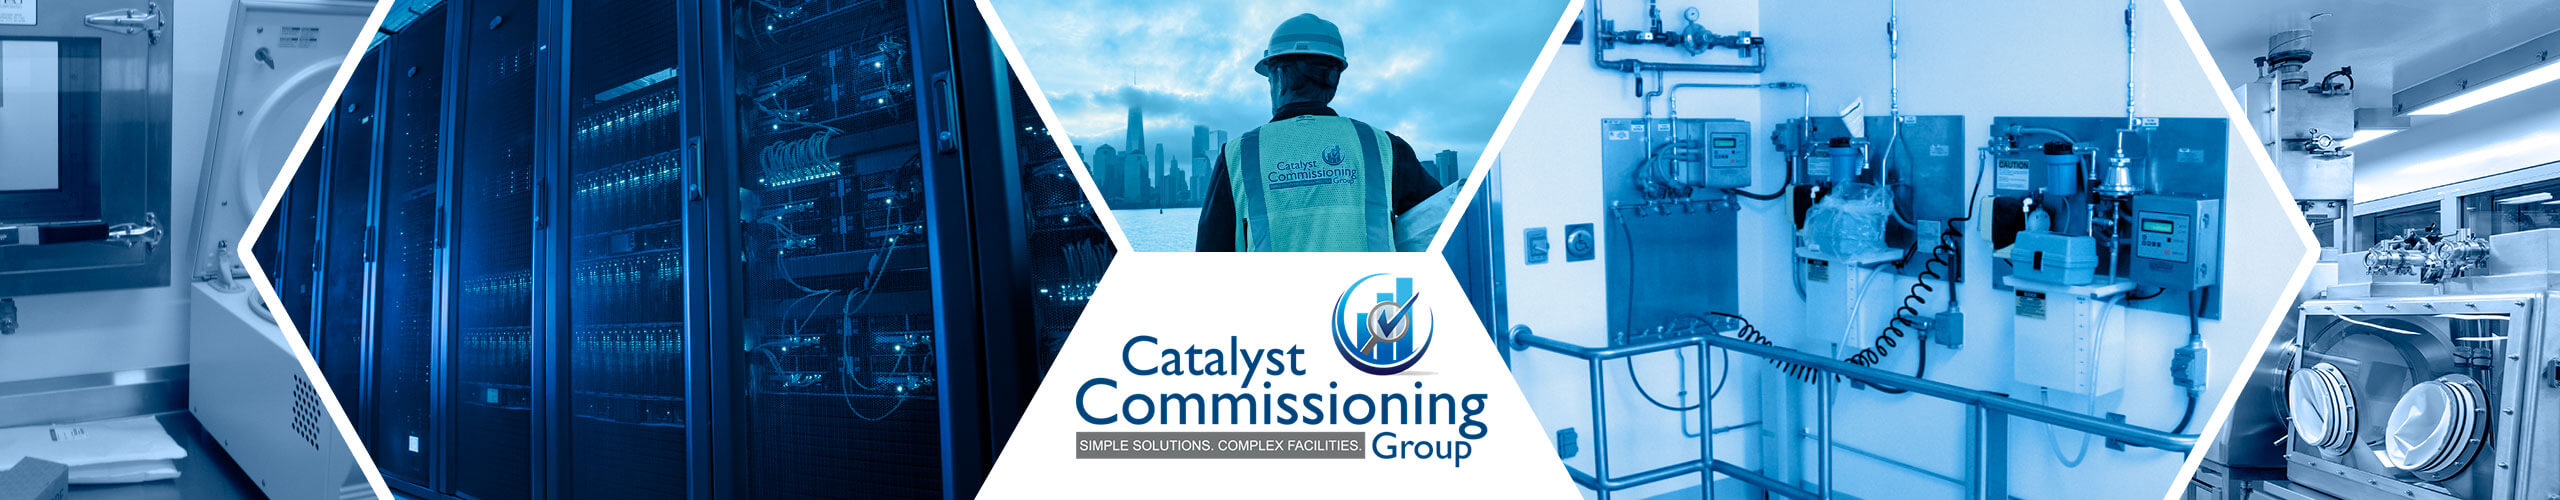 home-engineering-collage-header2-Catalyst-Commissioning-Group